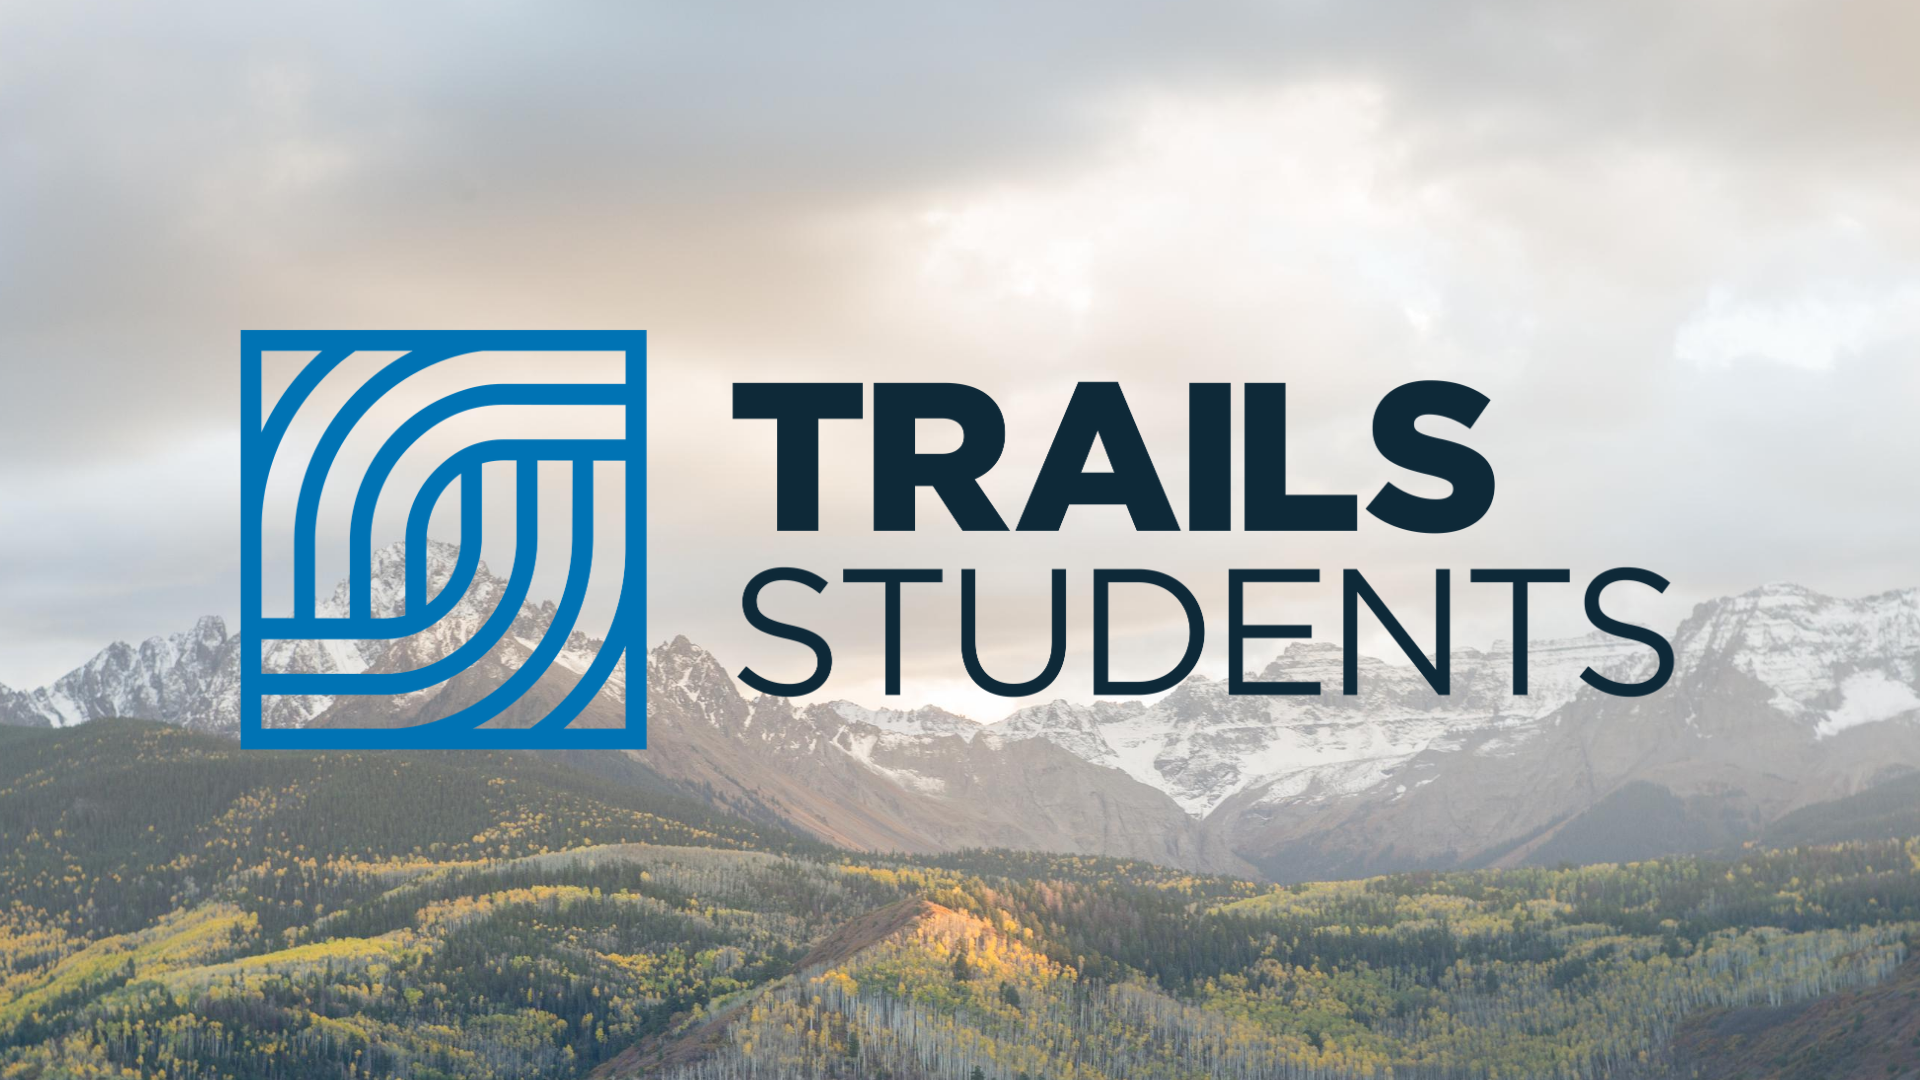 Trails Students Fall 2020 image